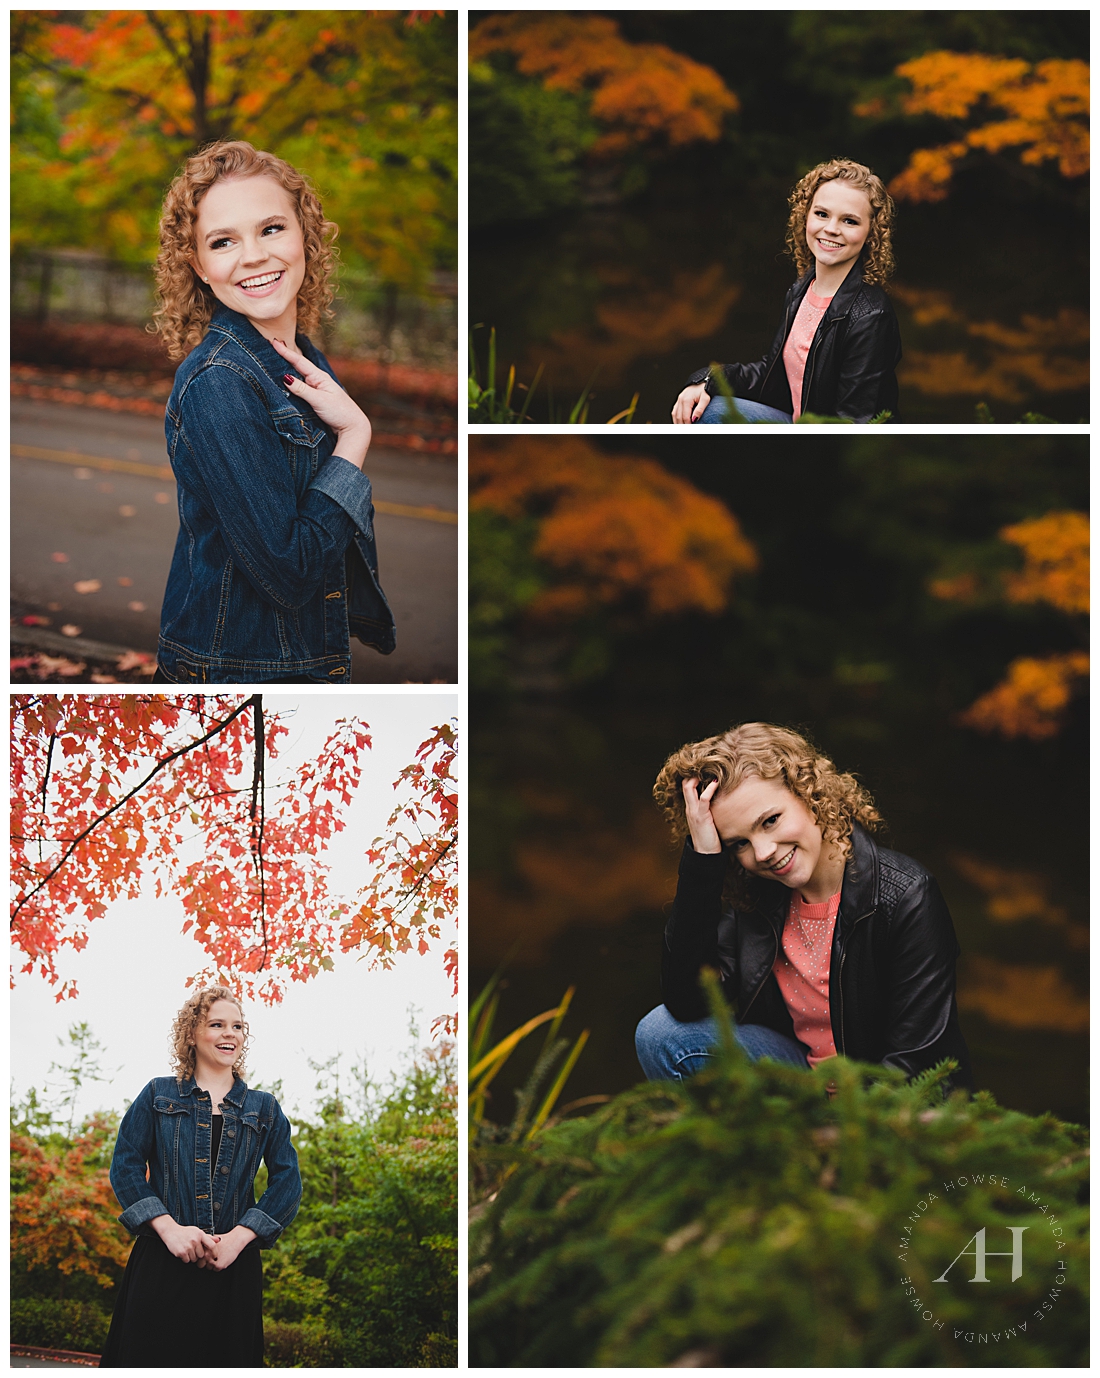 Layered Outfit Ideas for Fall Senior Portraits | How to Style a Leather Jacket, How to Wear a Jean Jacket for Senior Portraits, Fall Outfit Inspo, Natural Hair and Makeup, Curly Hair Senior Portraits, Fall Colors | Photographed by the Best Tacoma Senior Photographer Amanda Howse